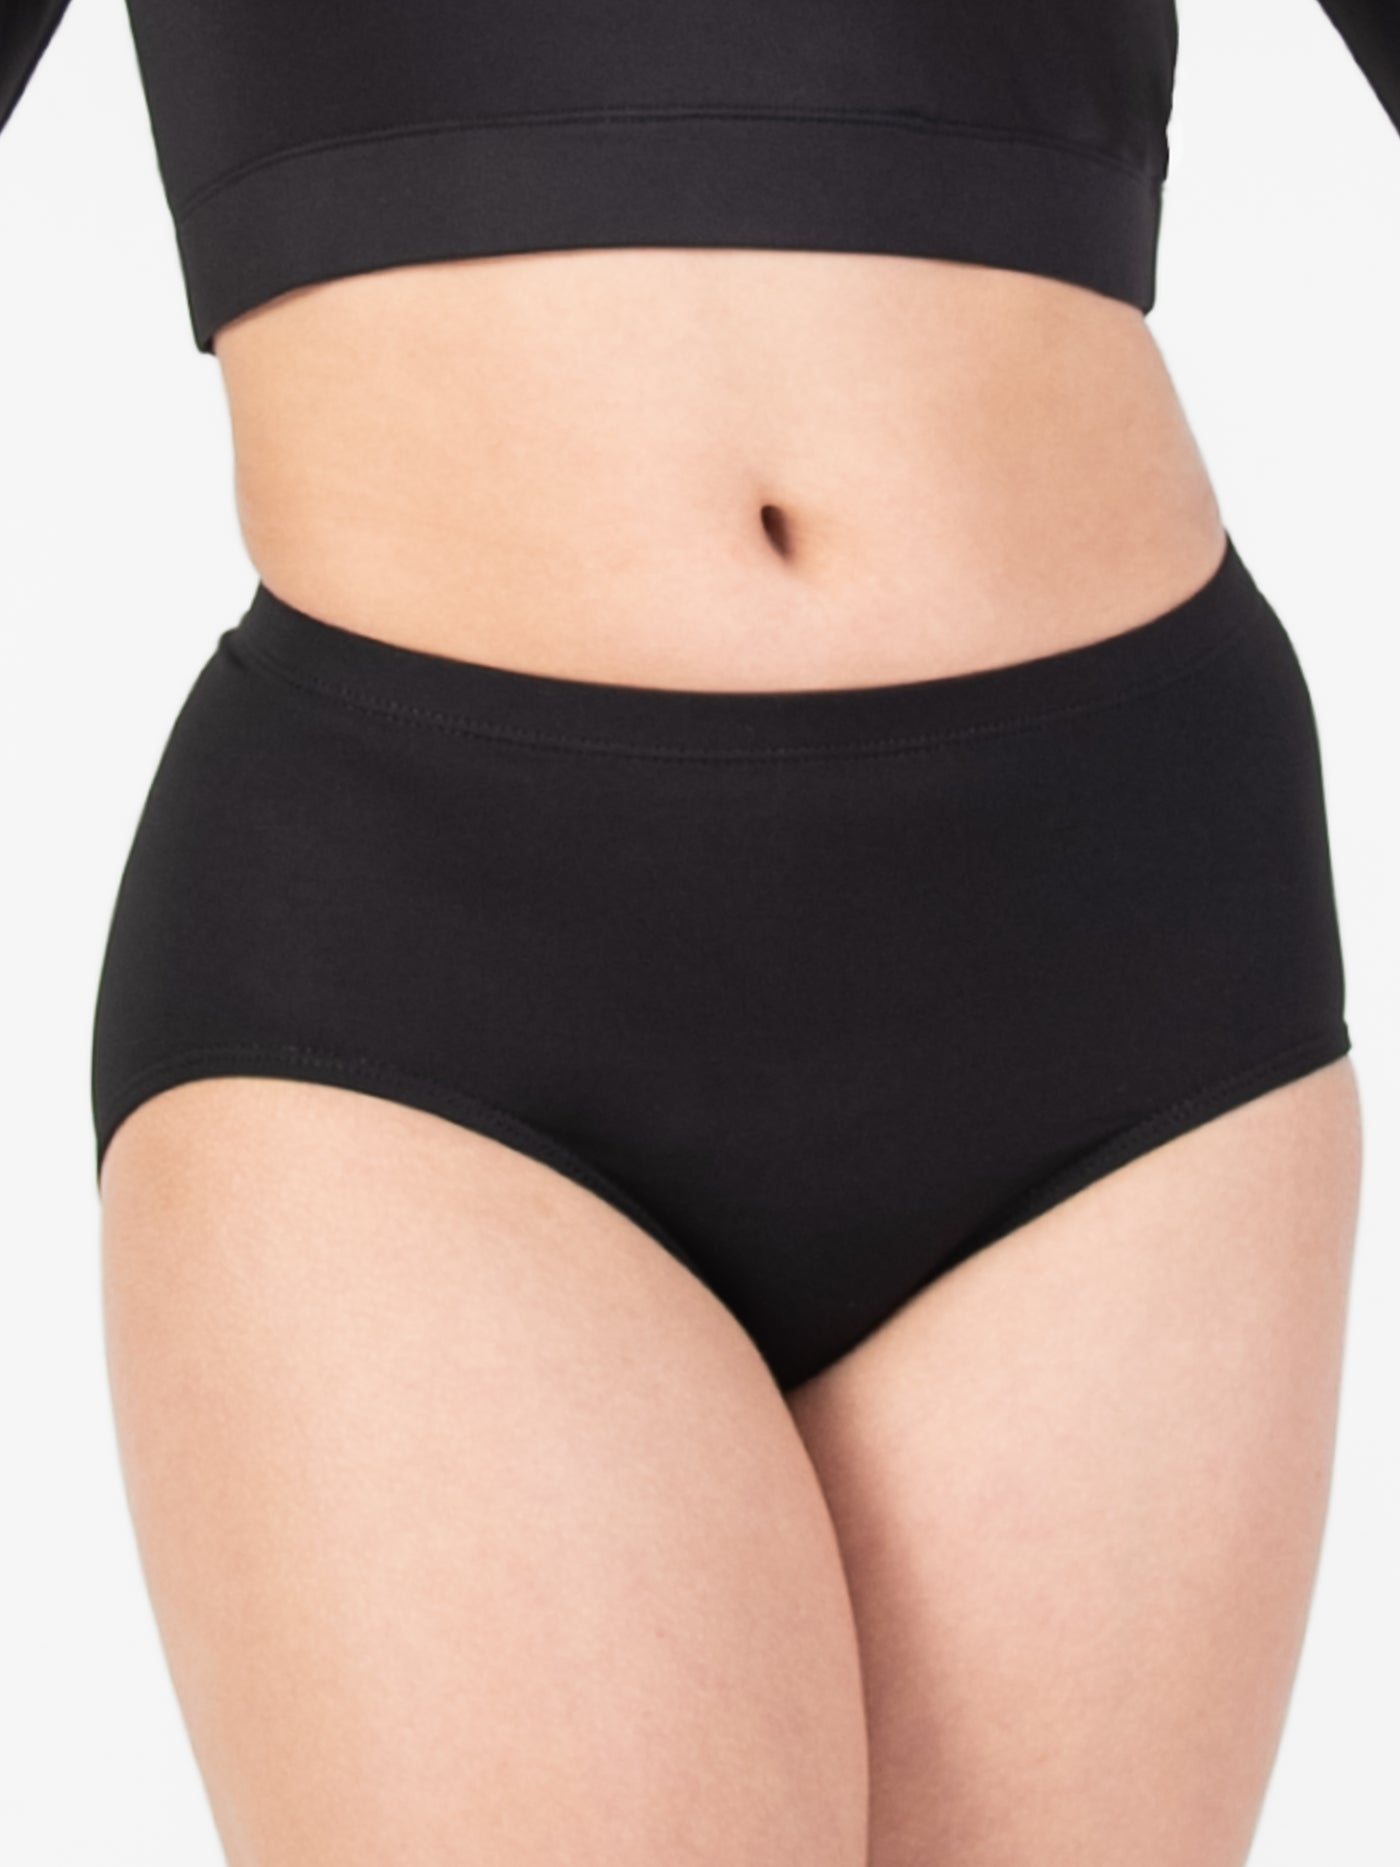 Body Wrapper's Woman's ProWEAR™ Ruched Back Brief BWP294